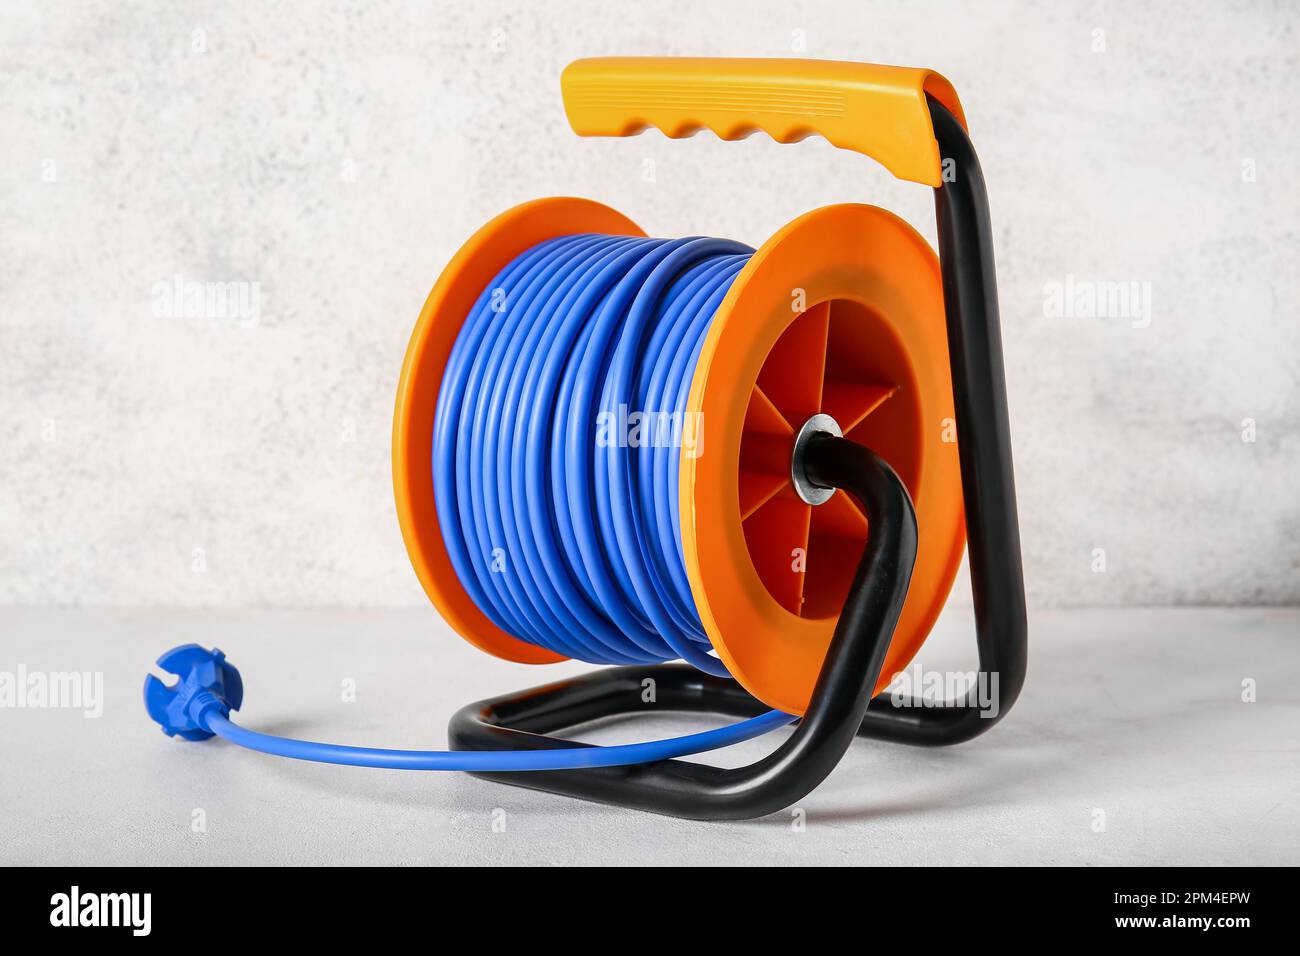 Extension electric cable reel on light background Stock Photo - Alamy